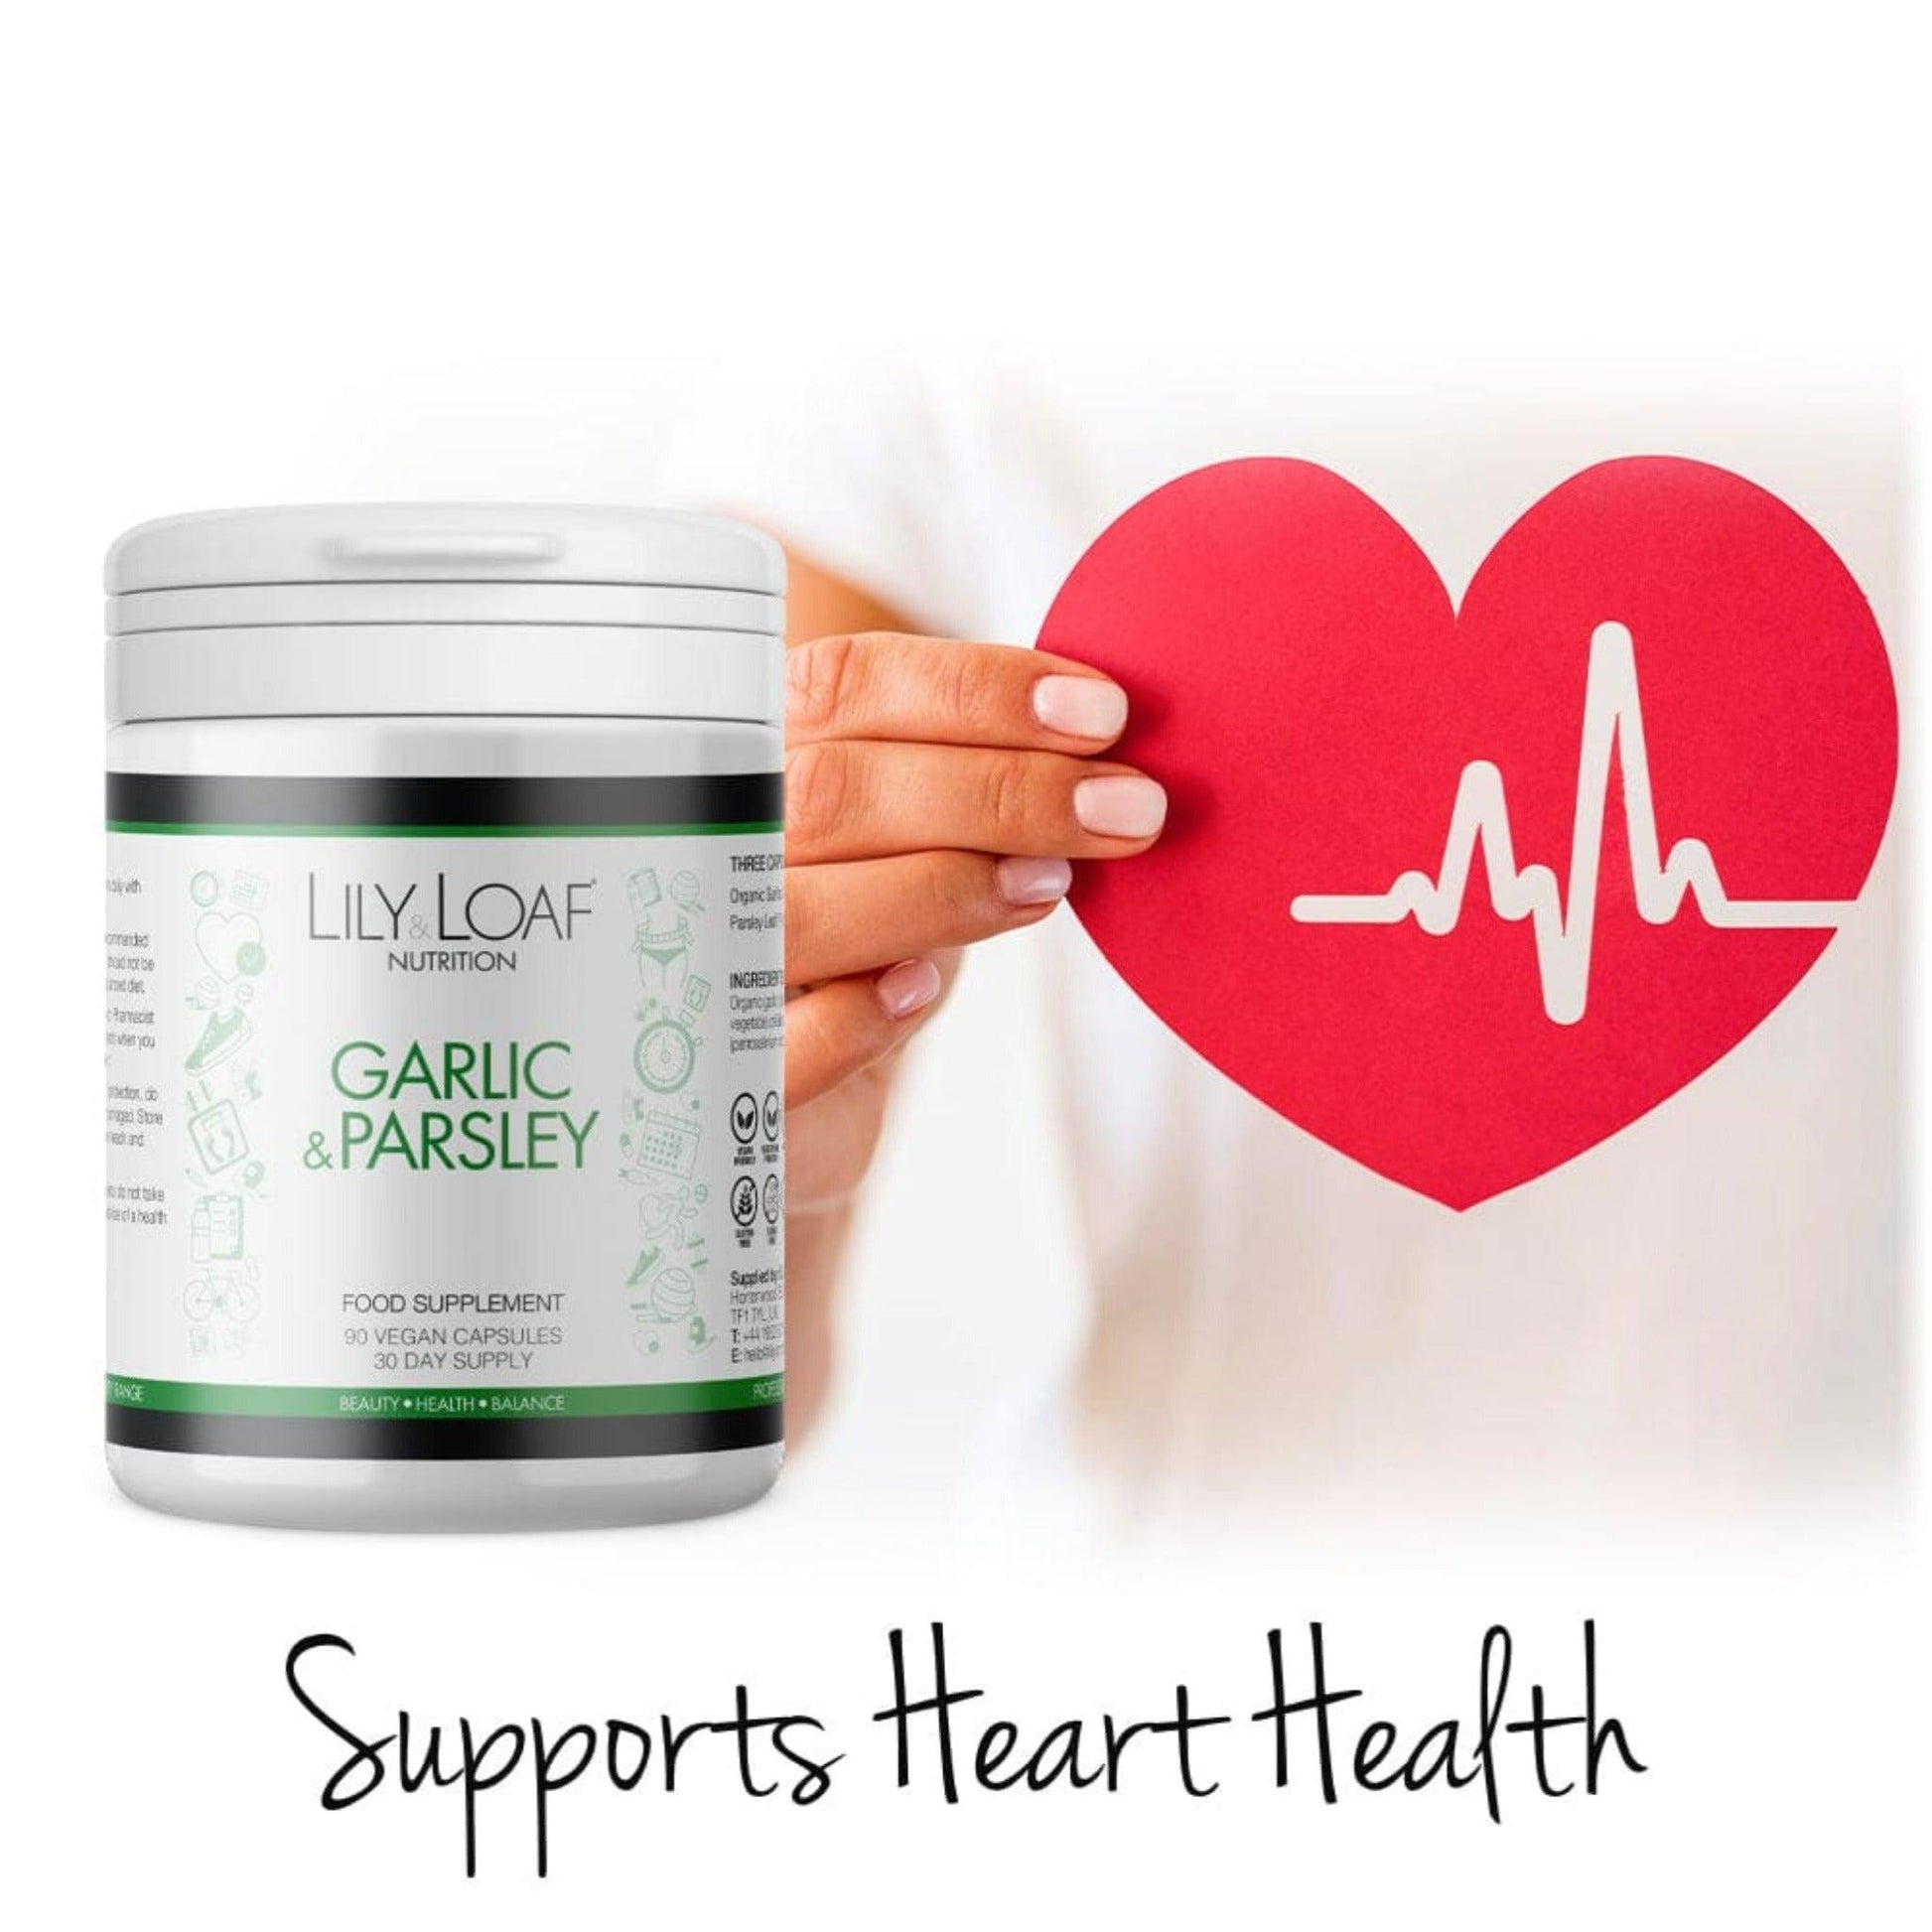 Garlic & Parsley front with heart promoting heart health